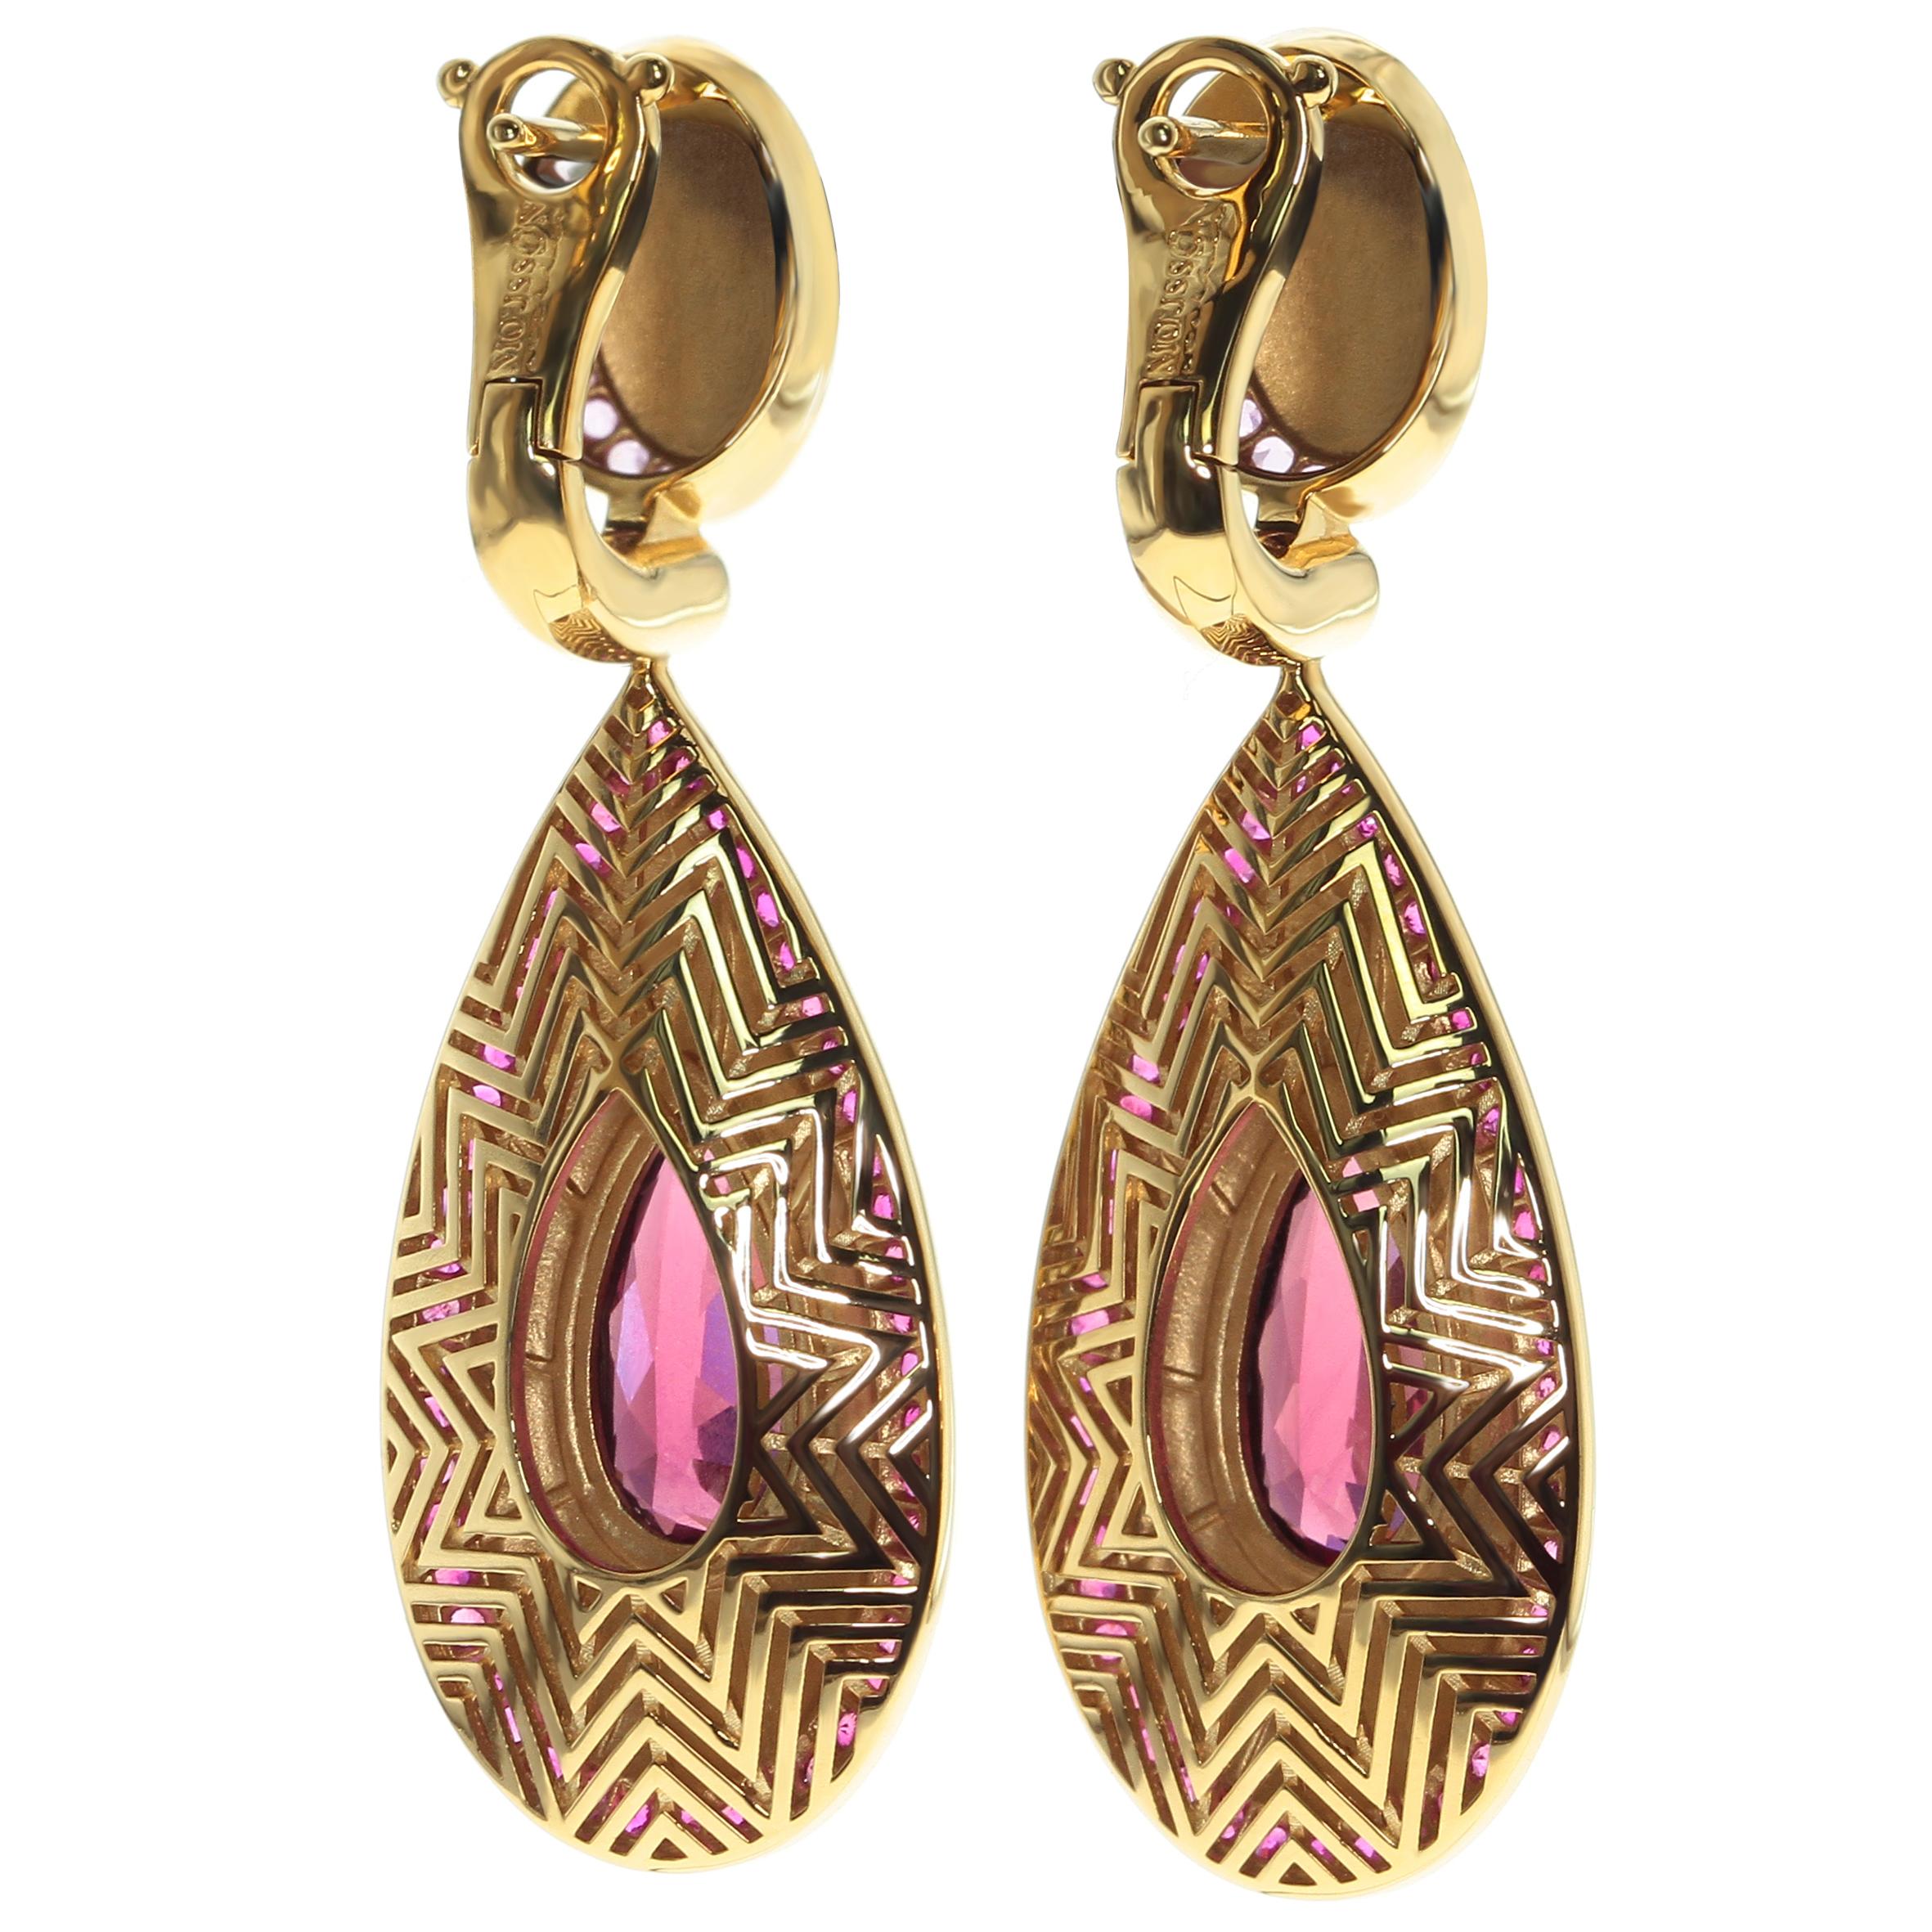 Ruby Pink Sapphire Rhodolite Garnet 18 Karat Yellow Gold Classical Earrings
Our trade mark texture Tweed looks great in this earrings, high detailing back part.
Accompanied with the ring LU116414761641

15.6x46.0x6.6 mm
15.13 gm